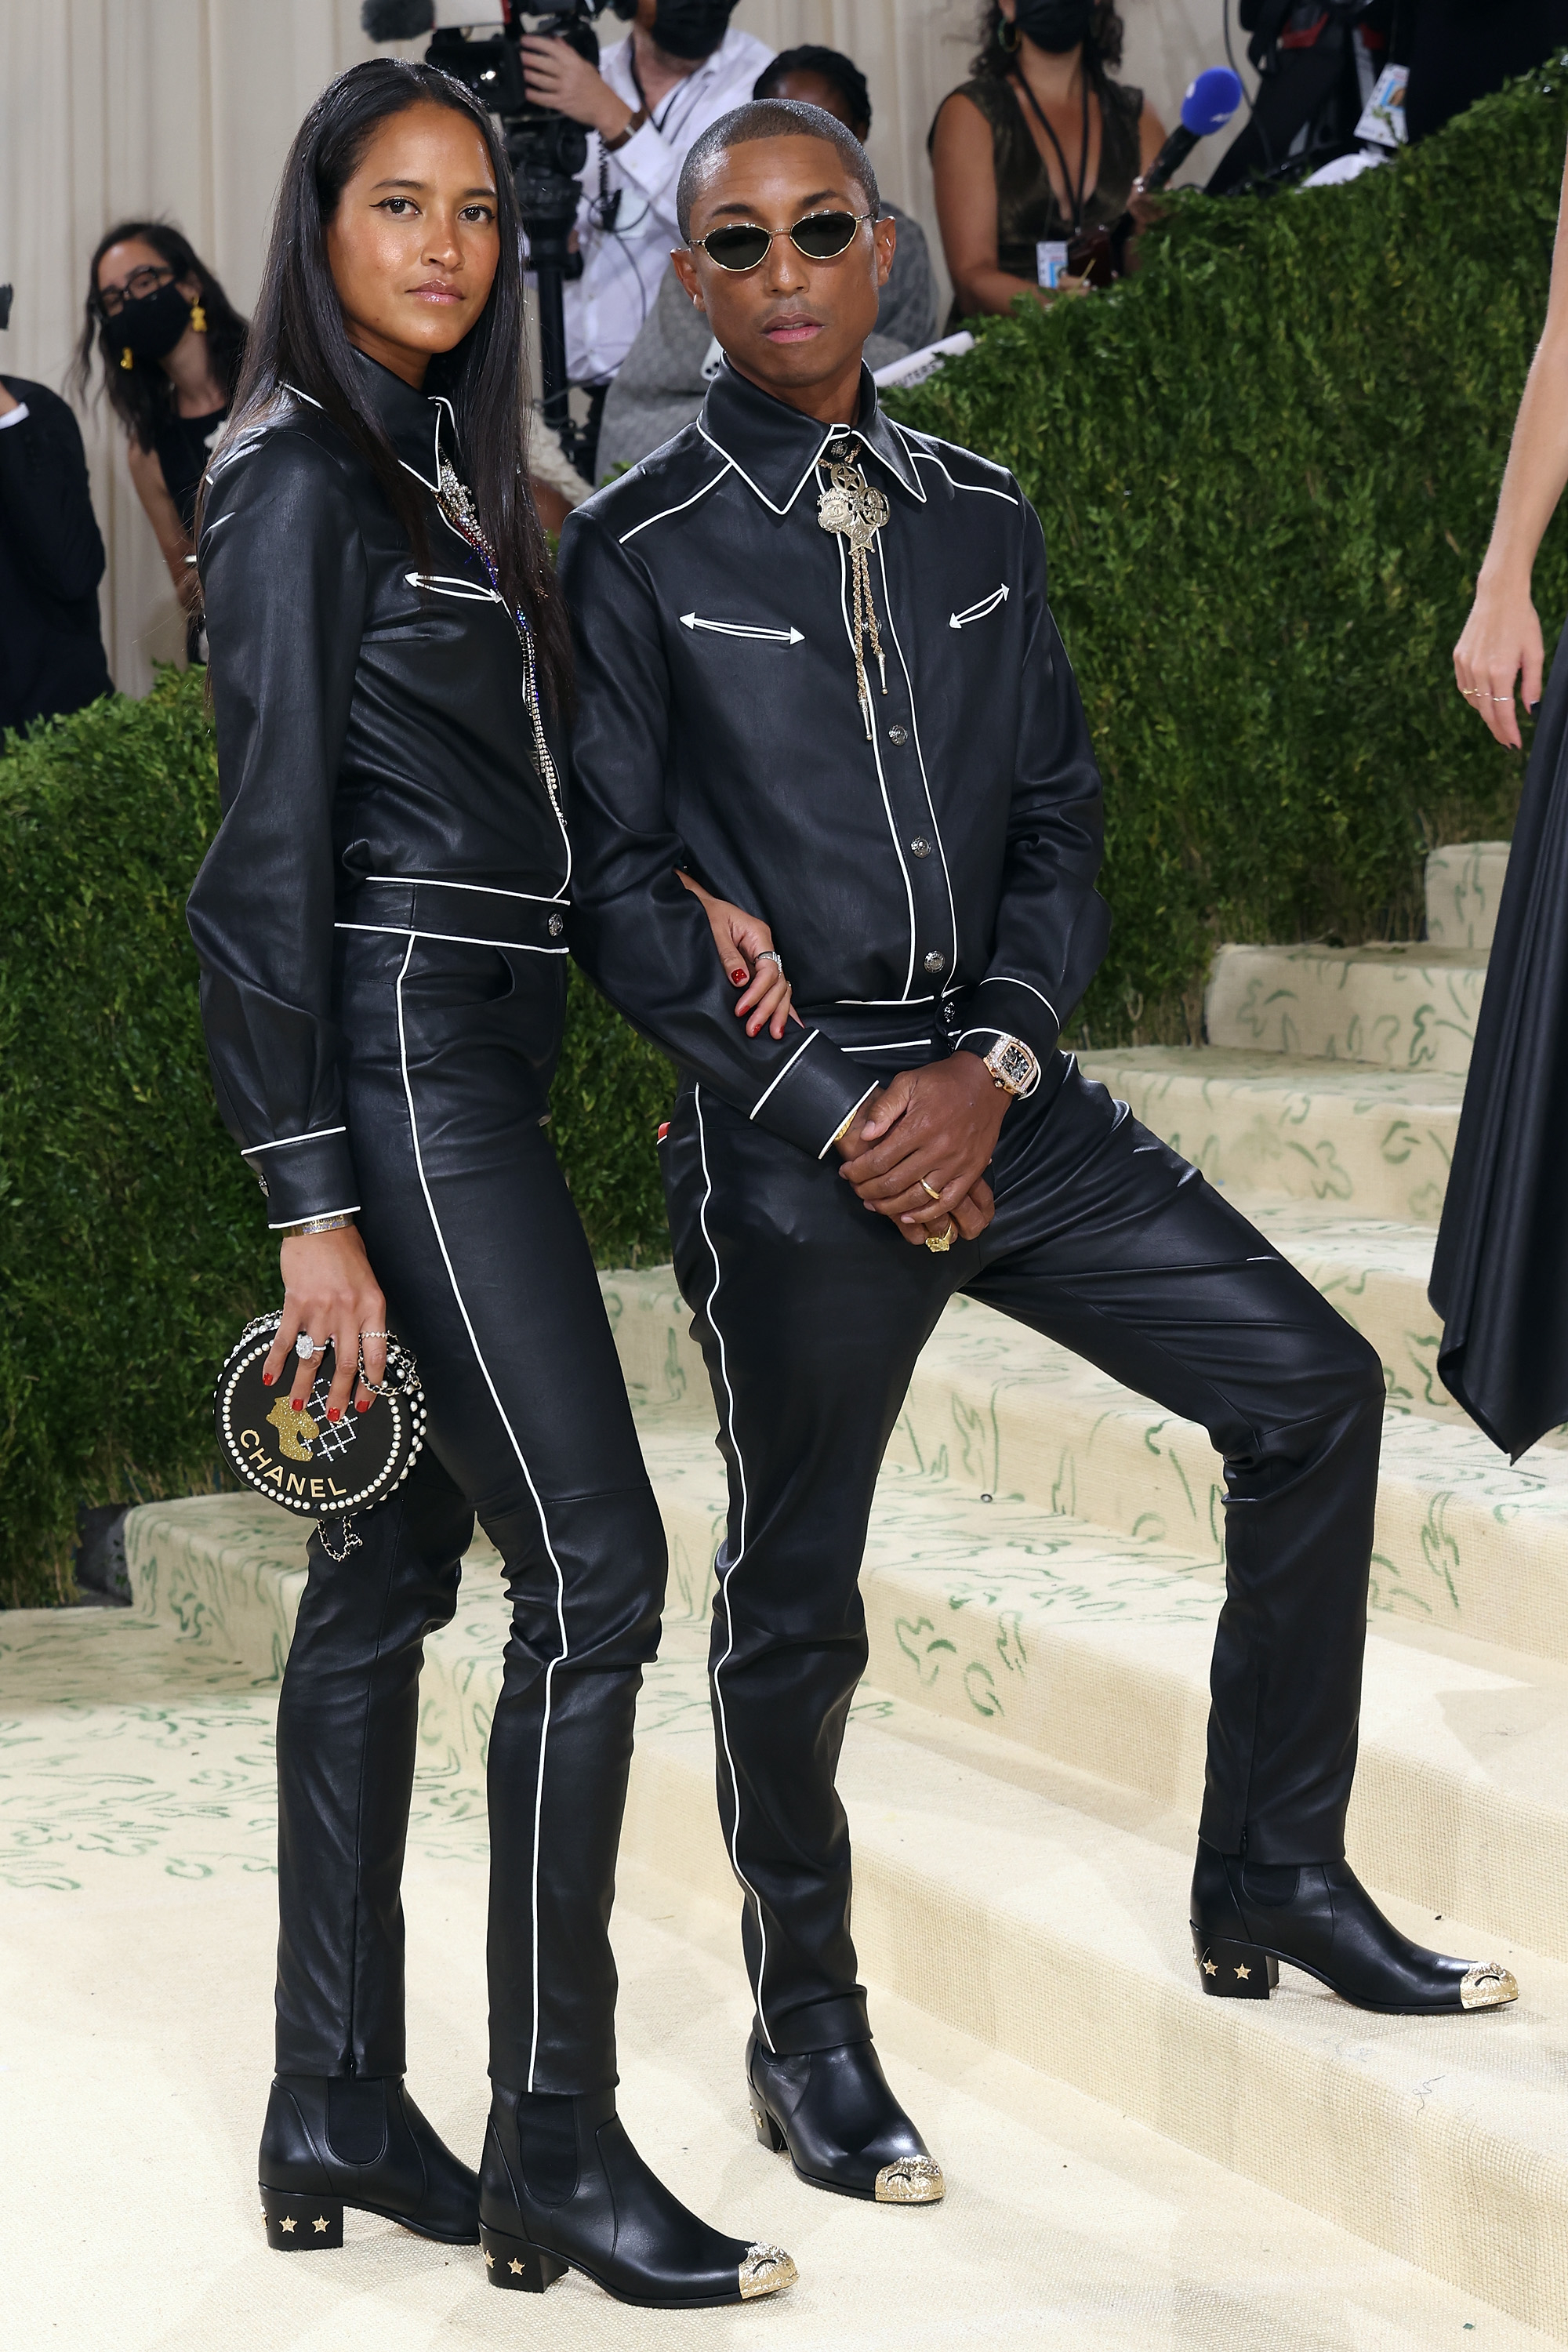 Two individuals at a themed event, dressed in matching black leather outfits with white accents, posing on stairs